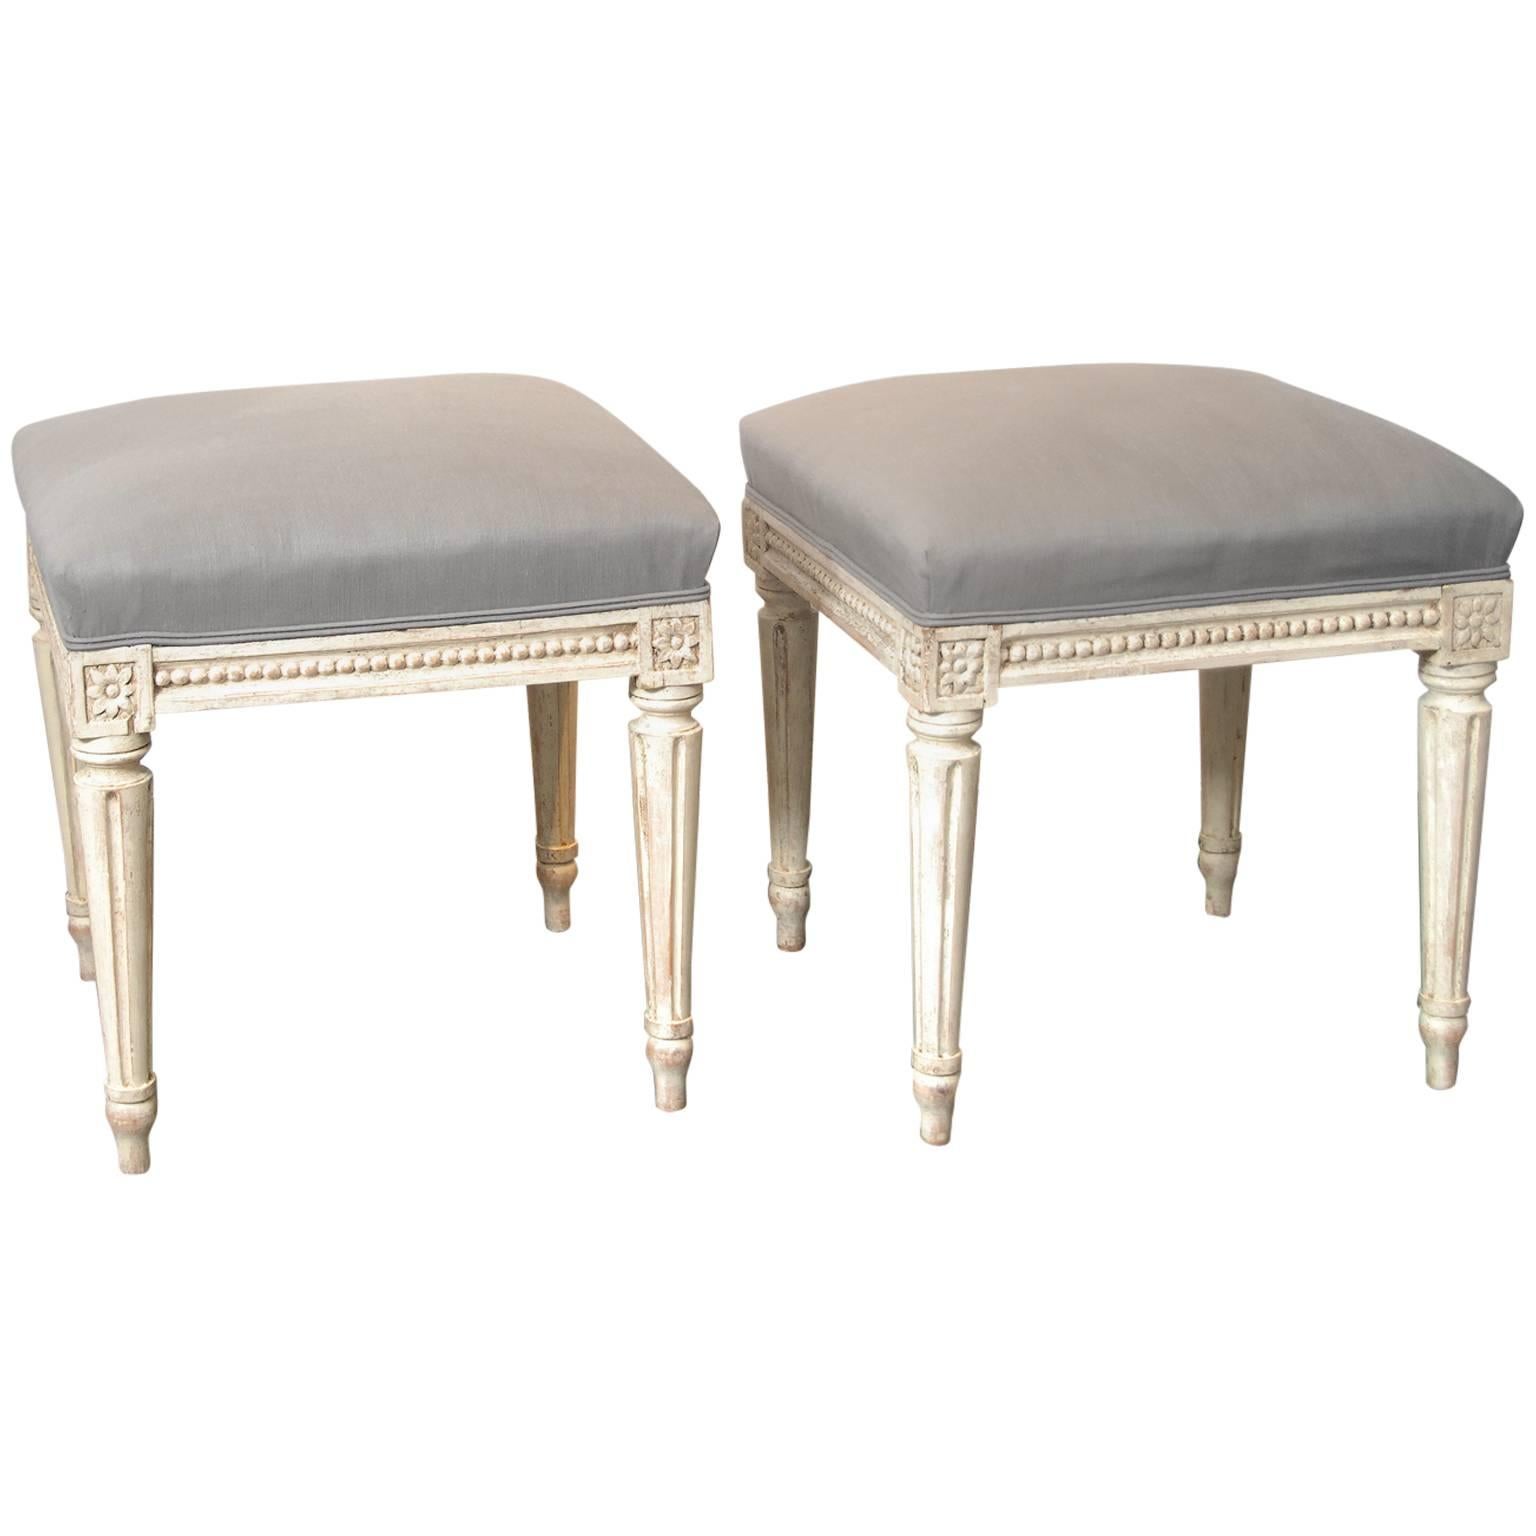 Pair of 18th Century Gustavian Stools For Sale